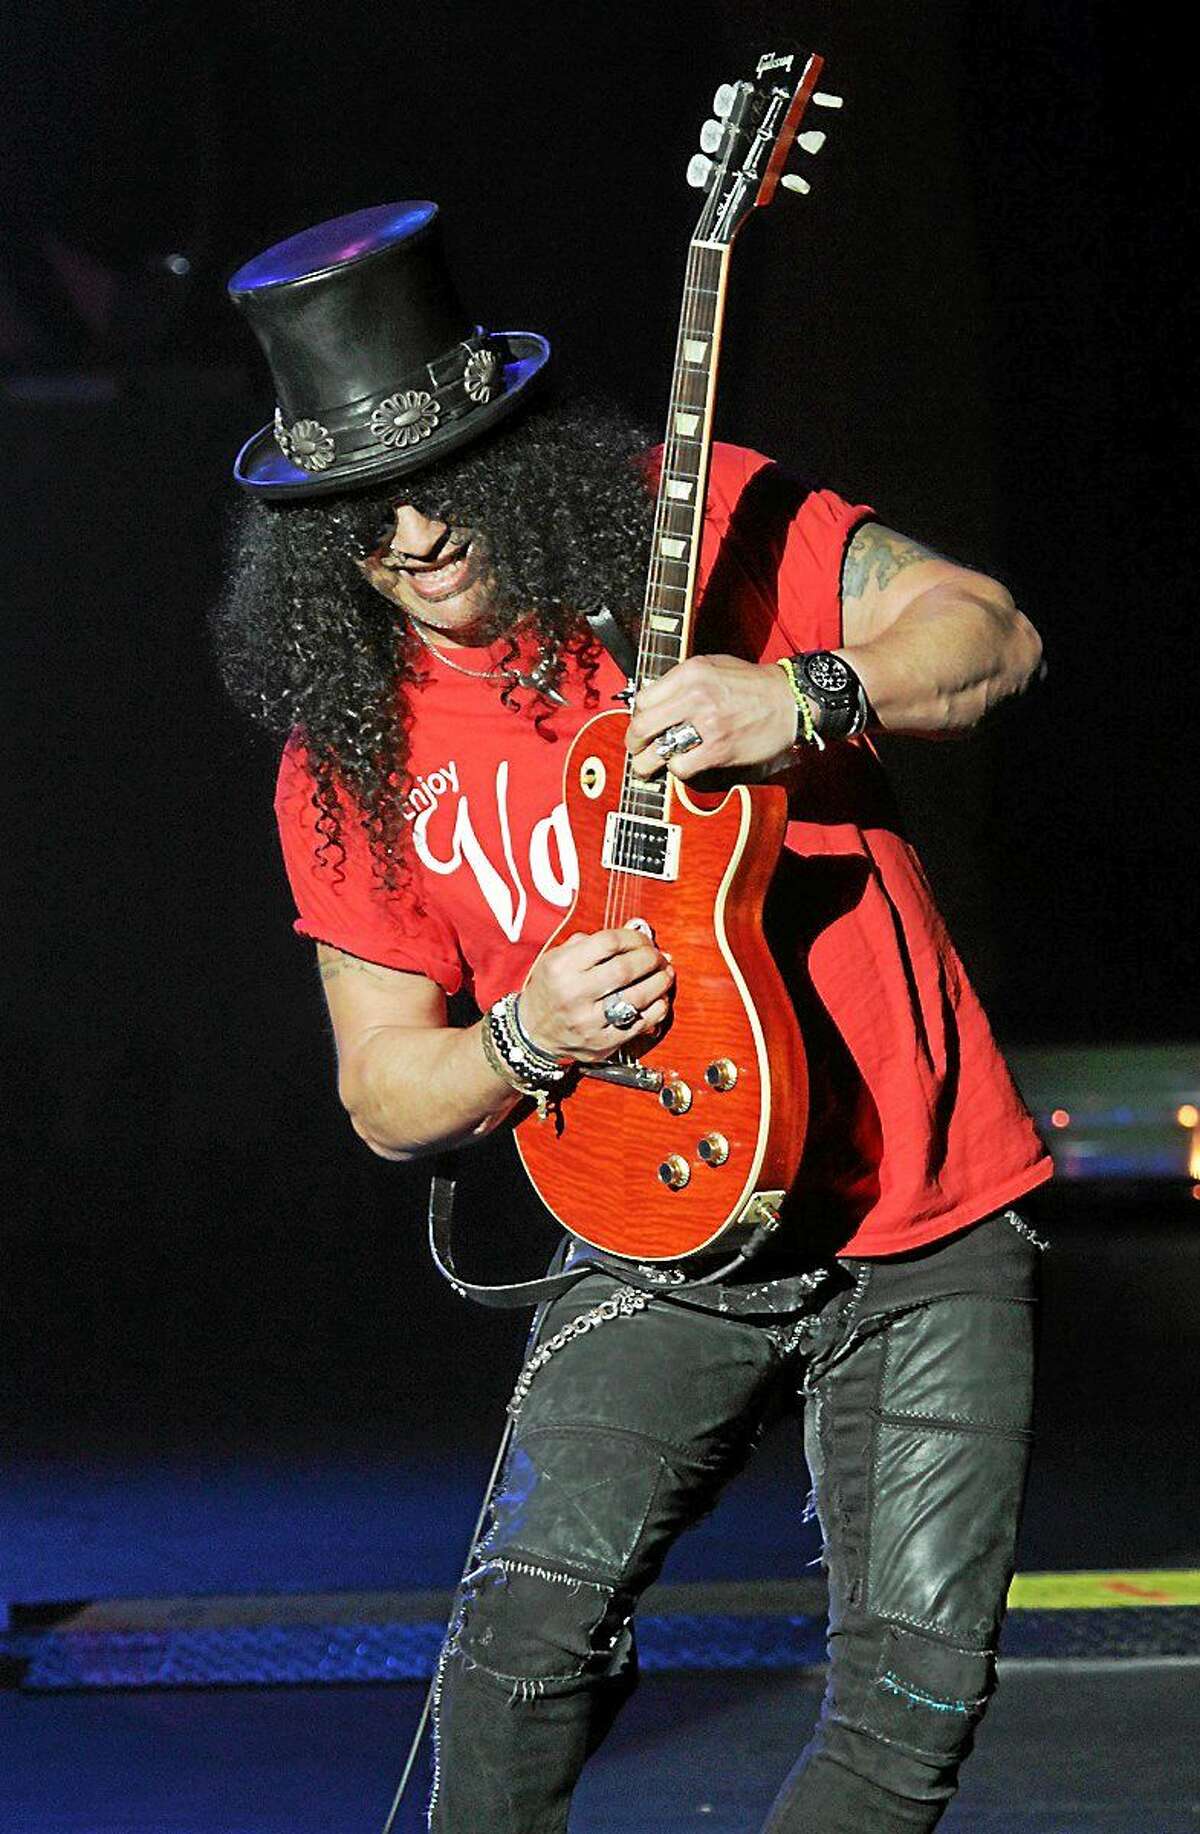 Photo by John Atashian Guitarist and songwriter Saul Hudson, better known by his stage name Slash is shown performing on stage during a recent concert appearance with his solo band.